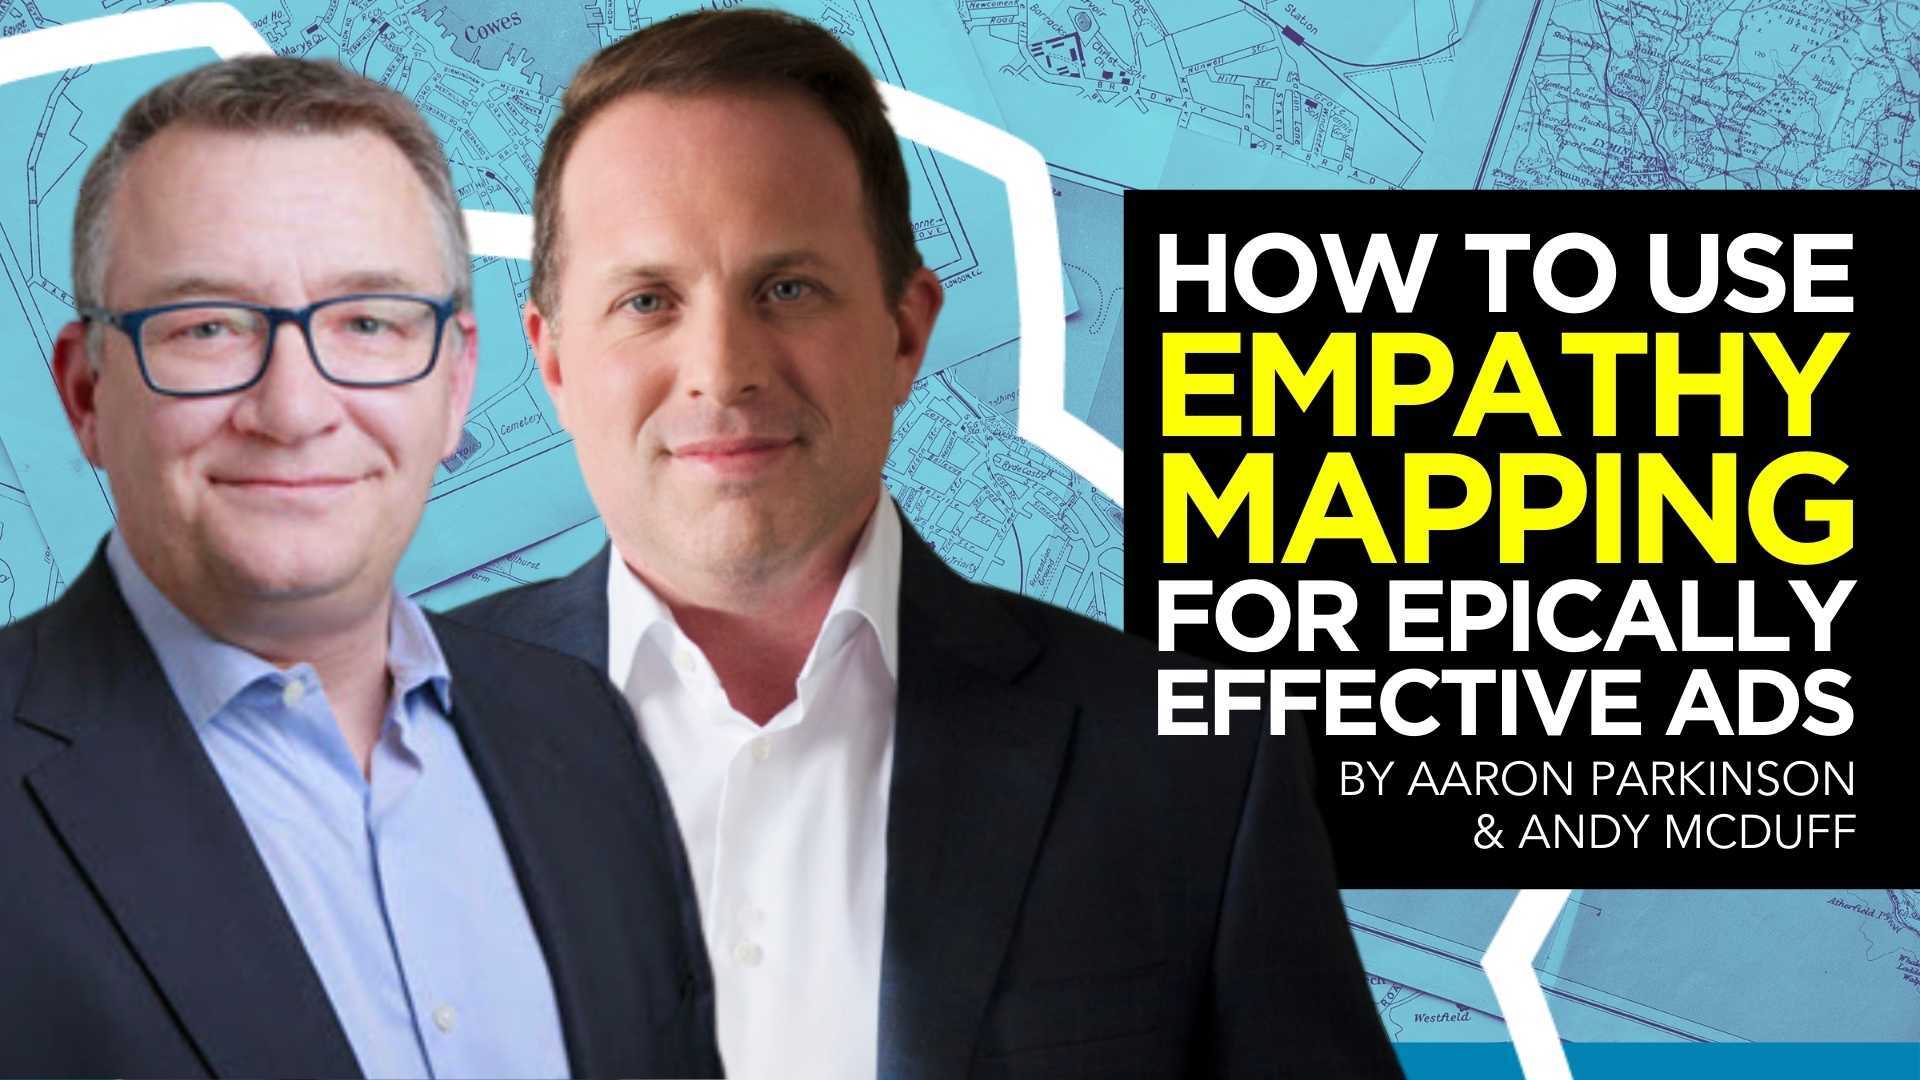 How to Use Empathy Mapping for Epically Effective Ads